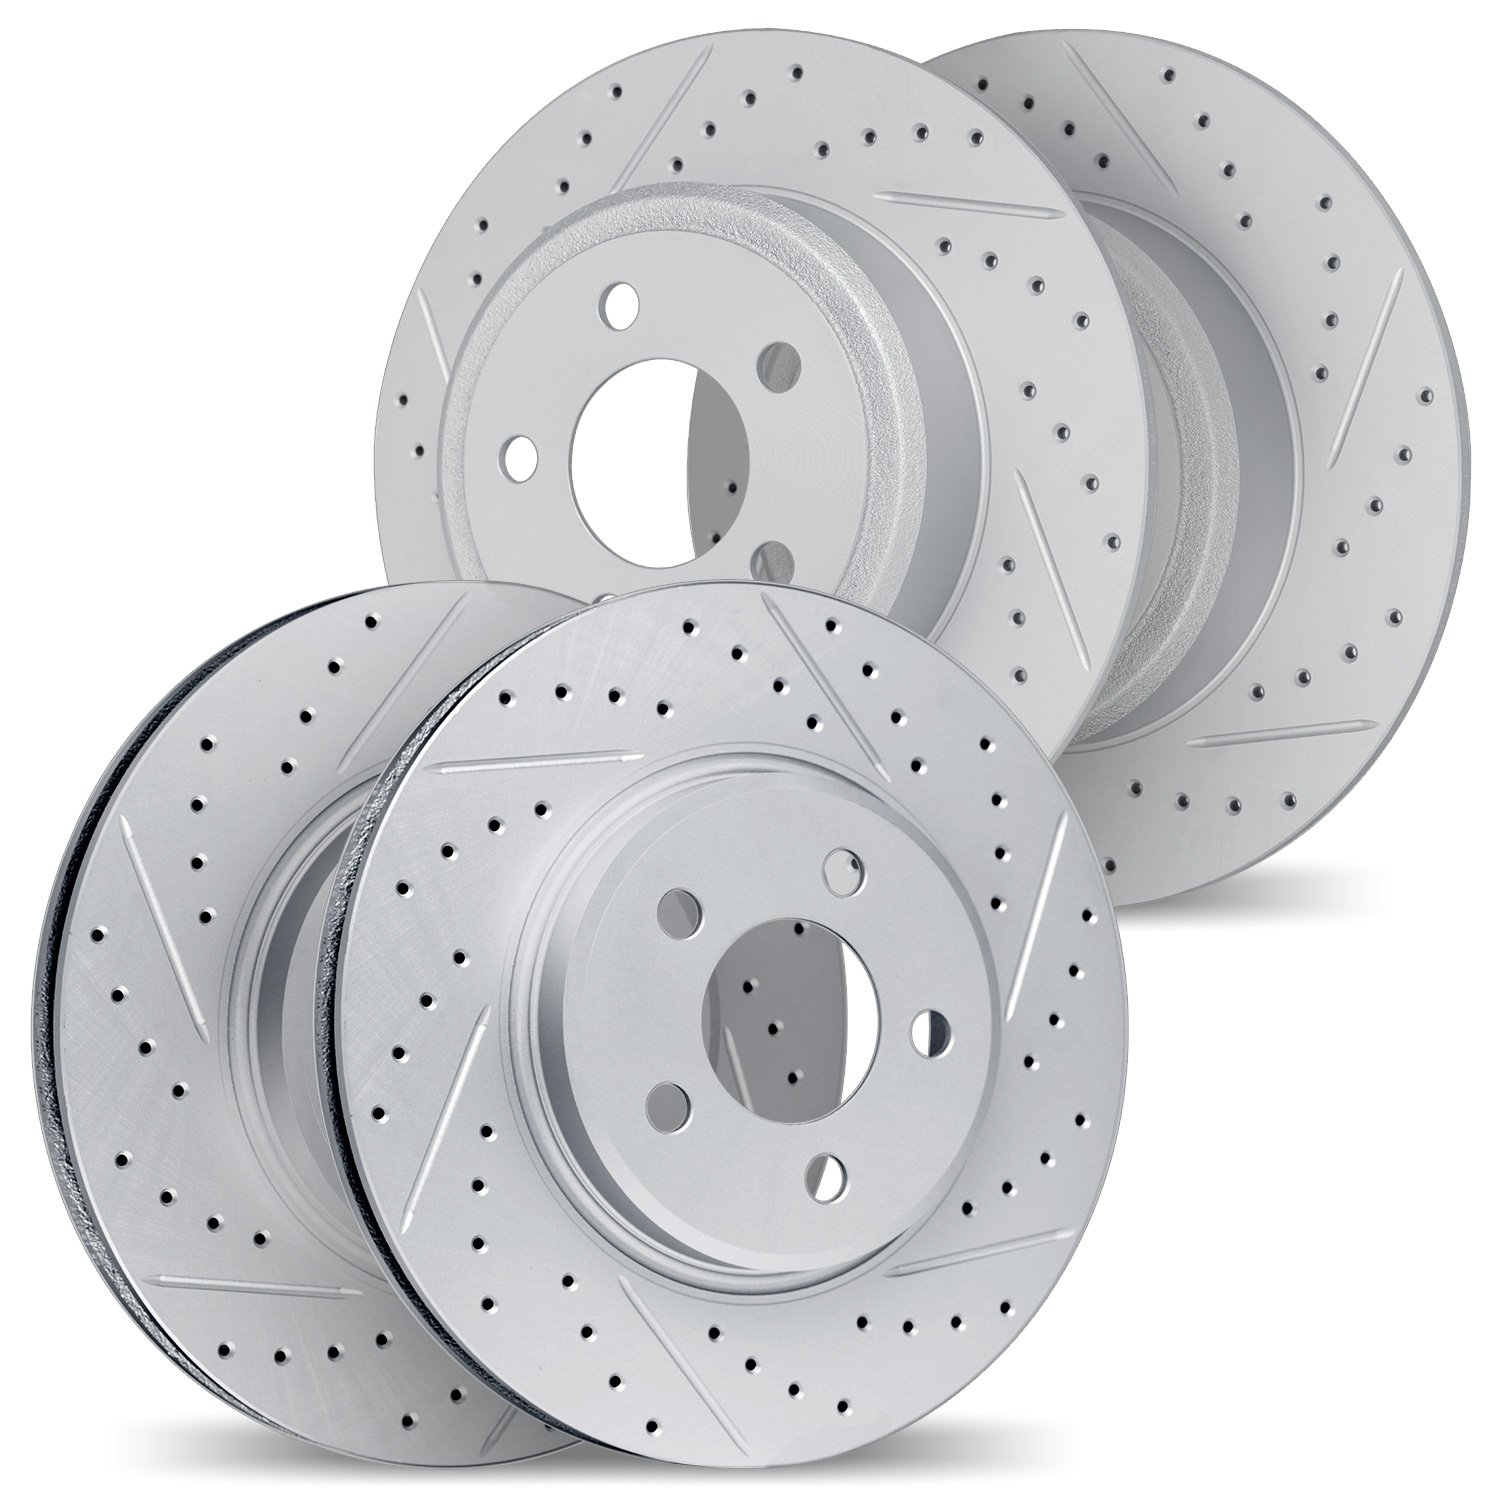 2004-01007 Geoperformance Drilled/Slotted Brake Rotors, 2007-2014 Suzuki, Position: Front and Rear